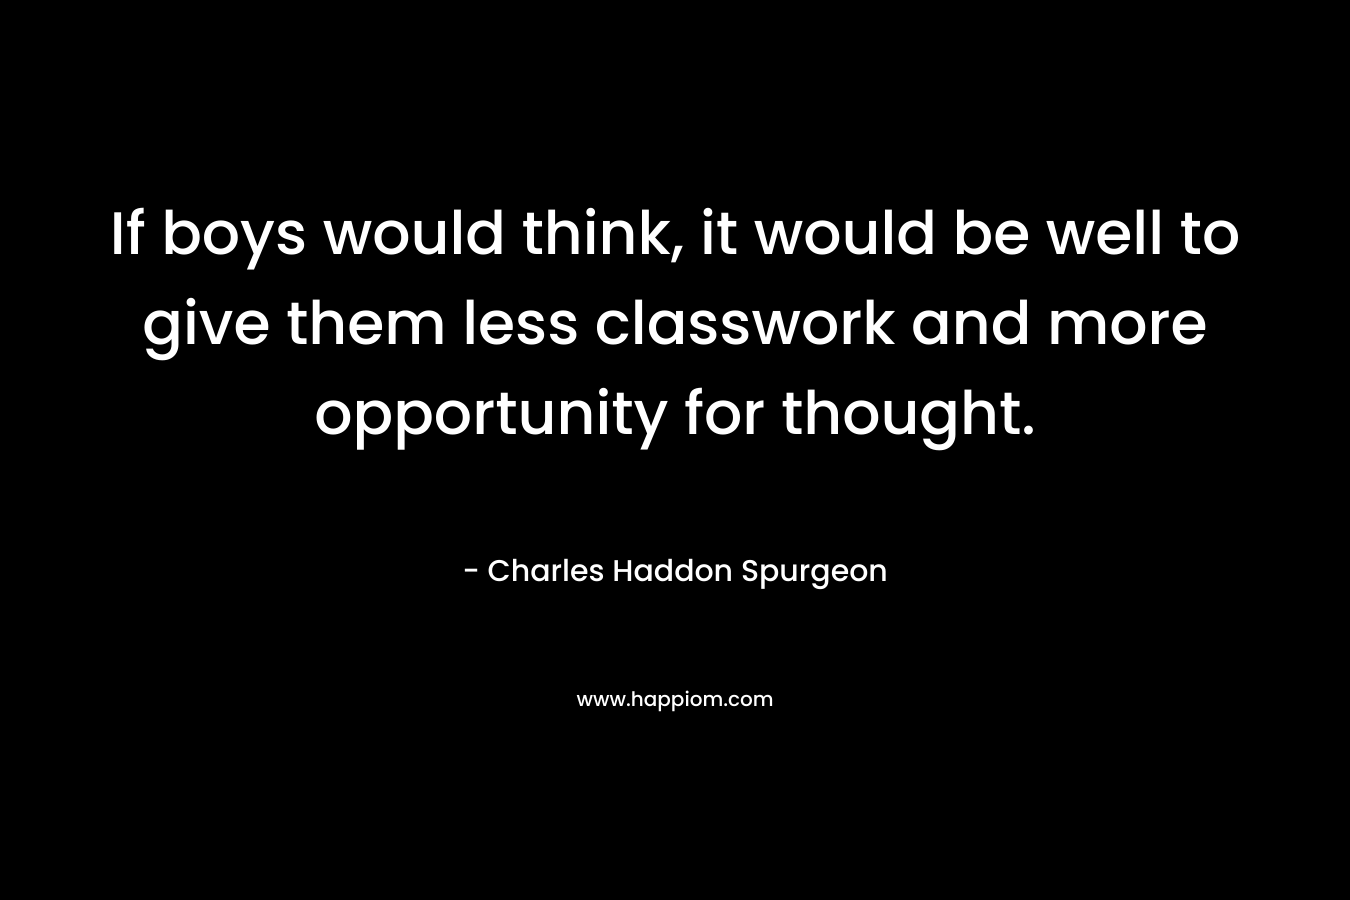 If boys would think, it would be well to give them less classwork and more opportunity for thought.